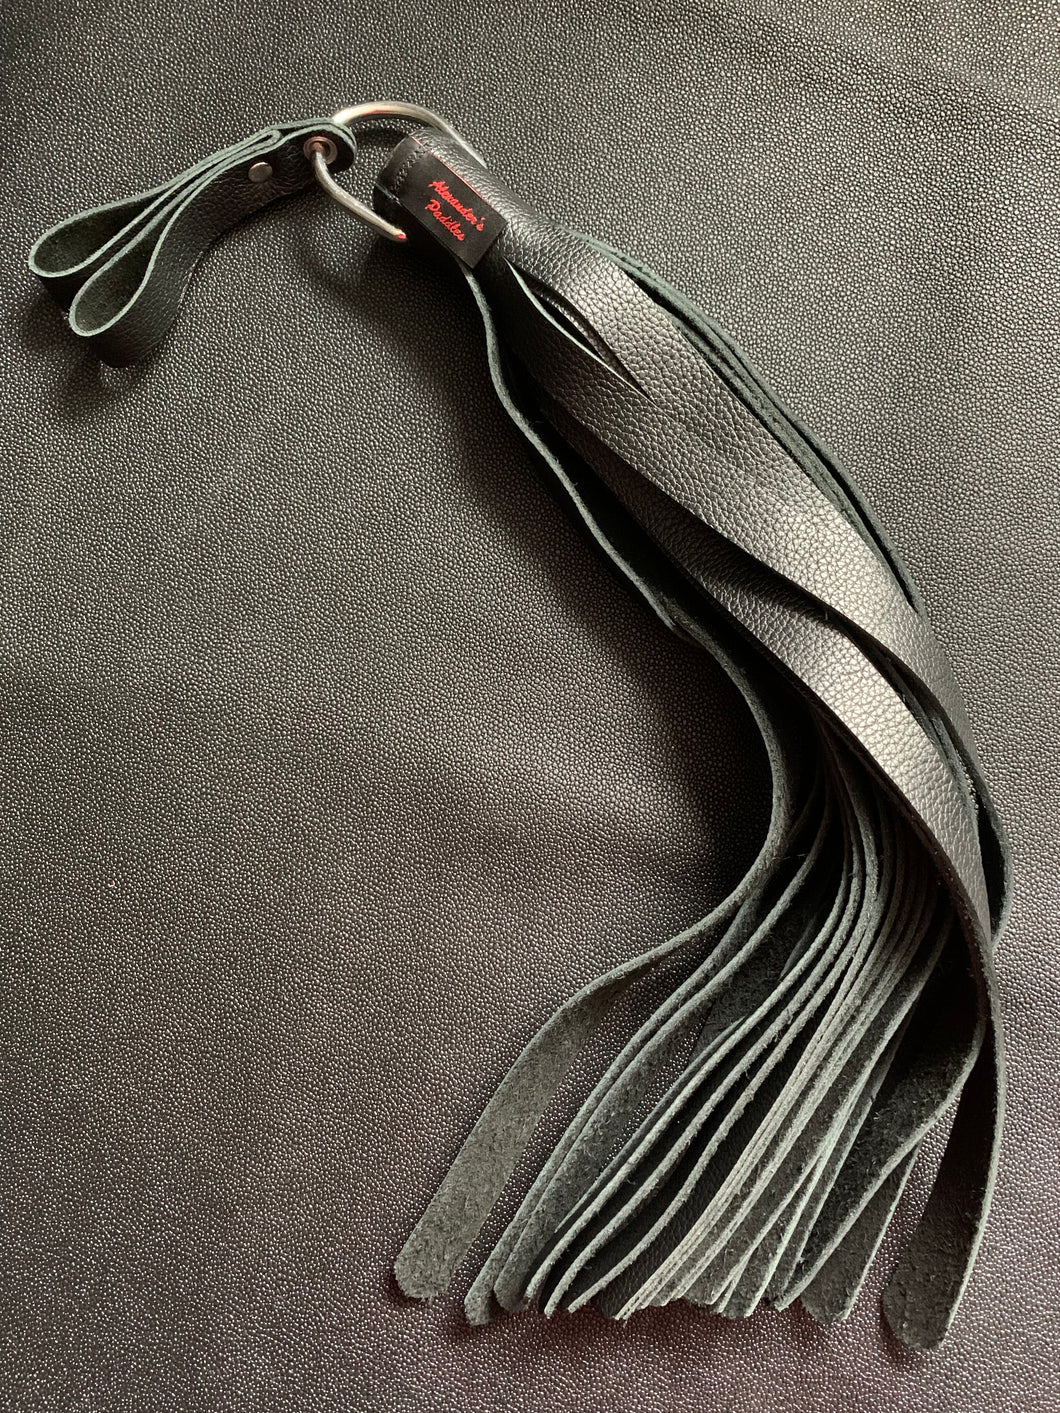 Finger Flogger: Full Size, Black Leather with Flower Conch